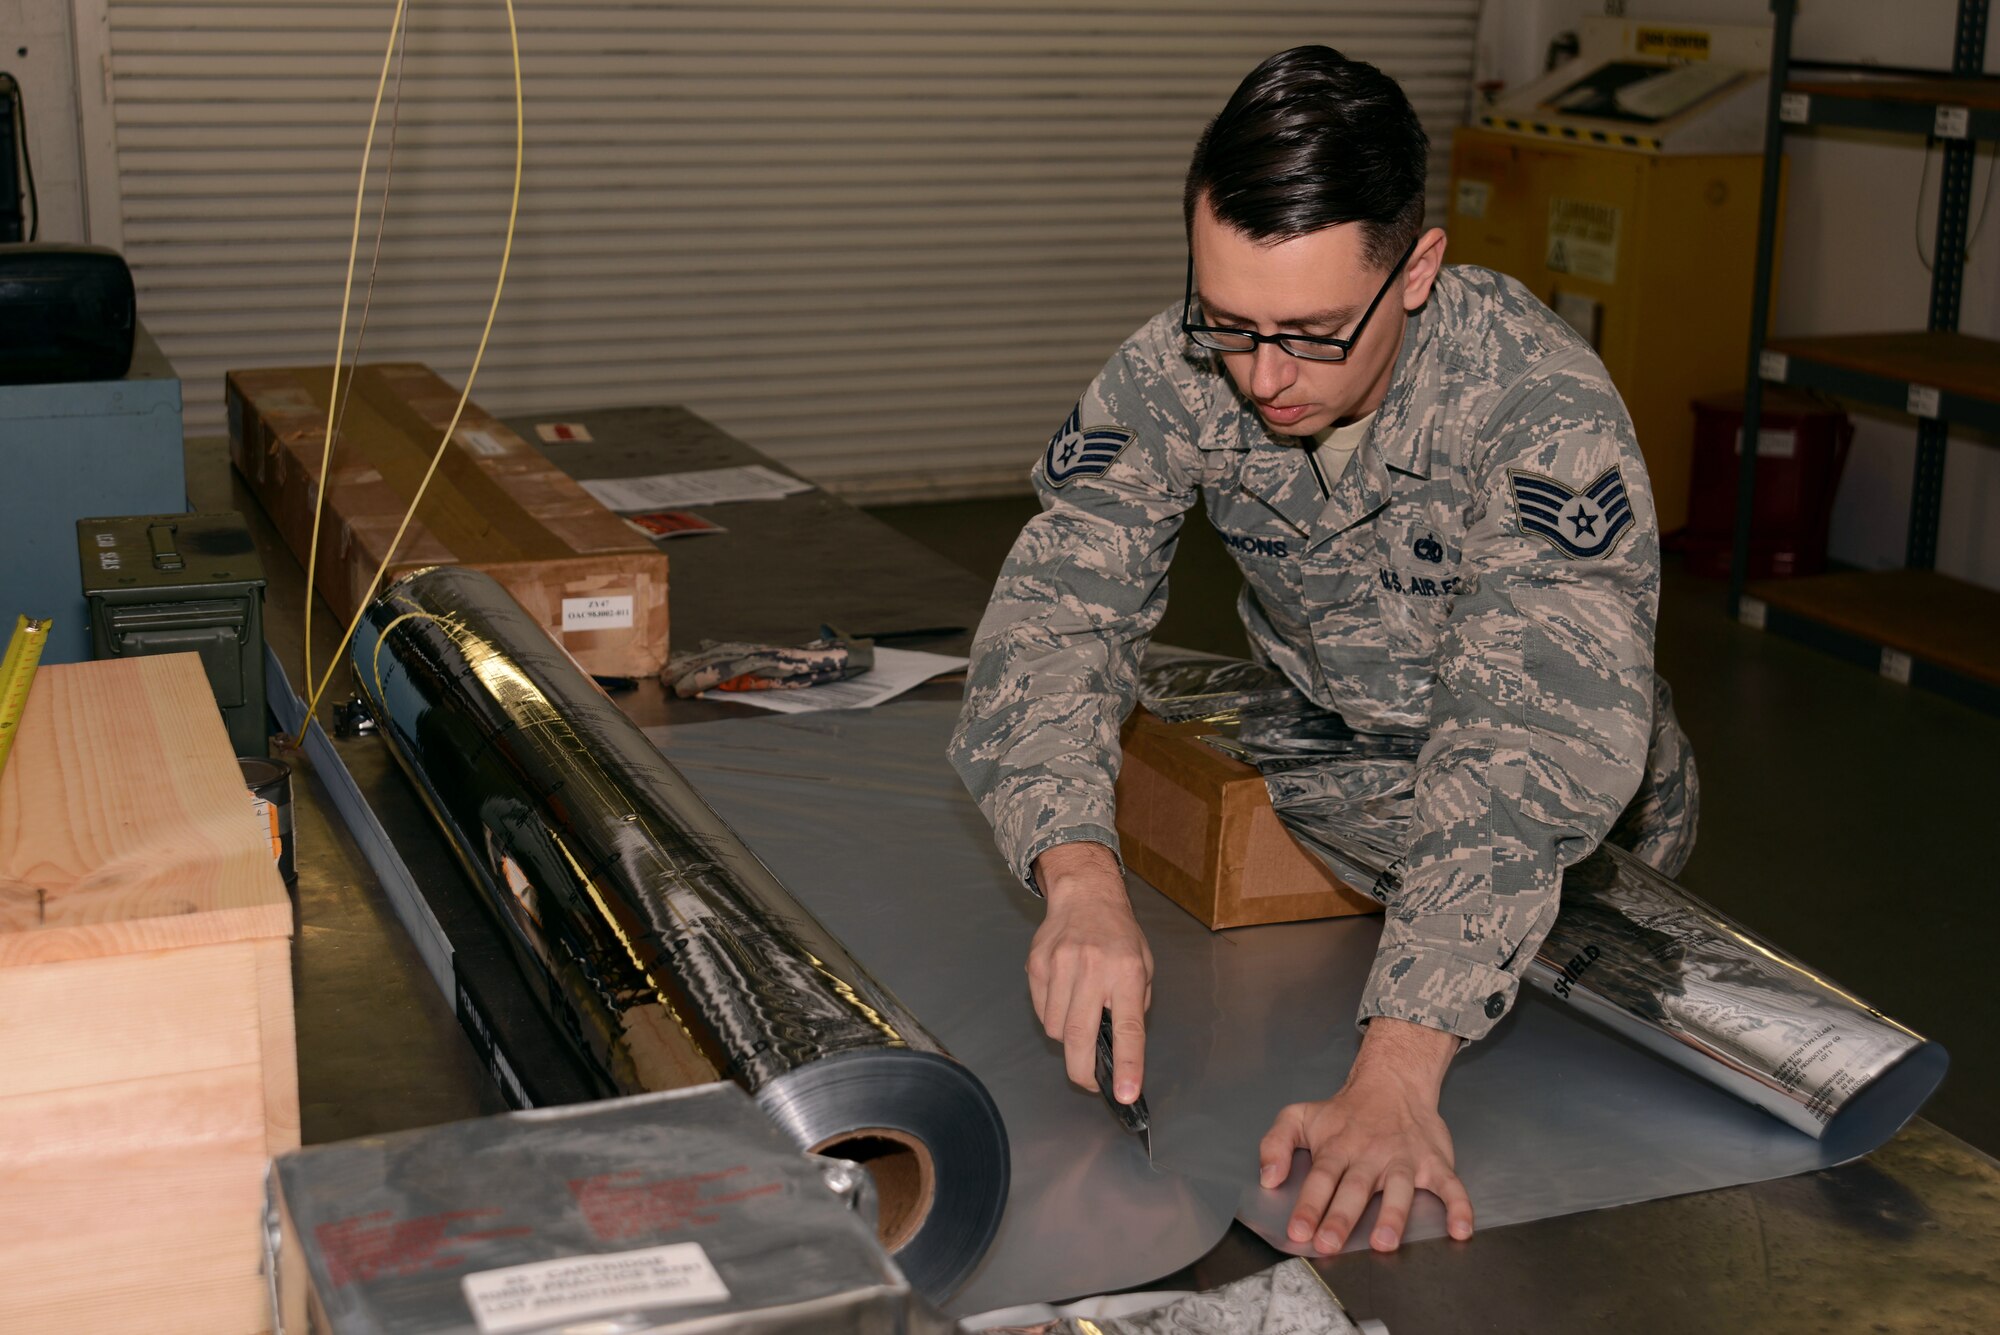 U.S. Air Force Staff Sgt. Ralph Simons, 20th Equipment Maintenance Squadron munitions inspector, cuts a vacuum seal barrier bag to properly fit a packed box of 40 mm grenades at Shaw Air Force Base, S.C., Feb. 6, 2017. The barrier bag acts as a static shield, preventing static that could detonate the munition. (U.S. Air Force photo by Airman 1st Class Kathryn R.C. Reaves)